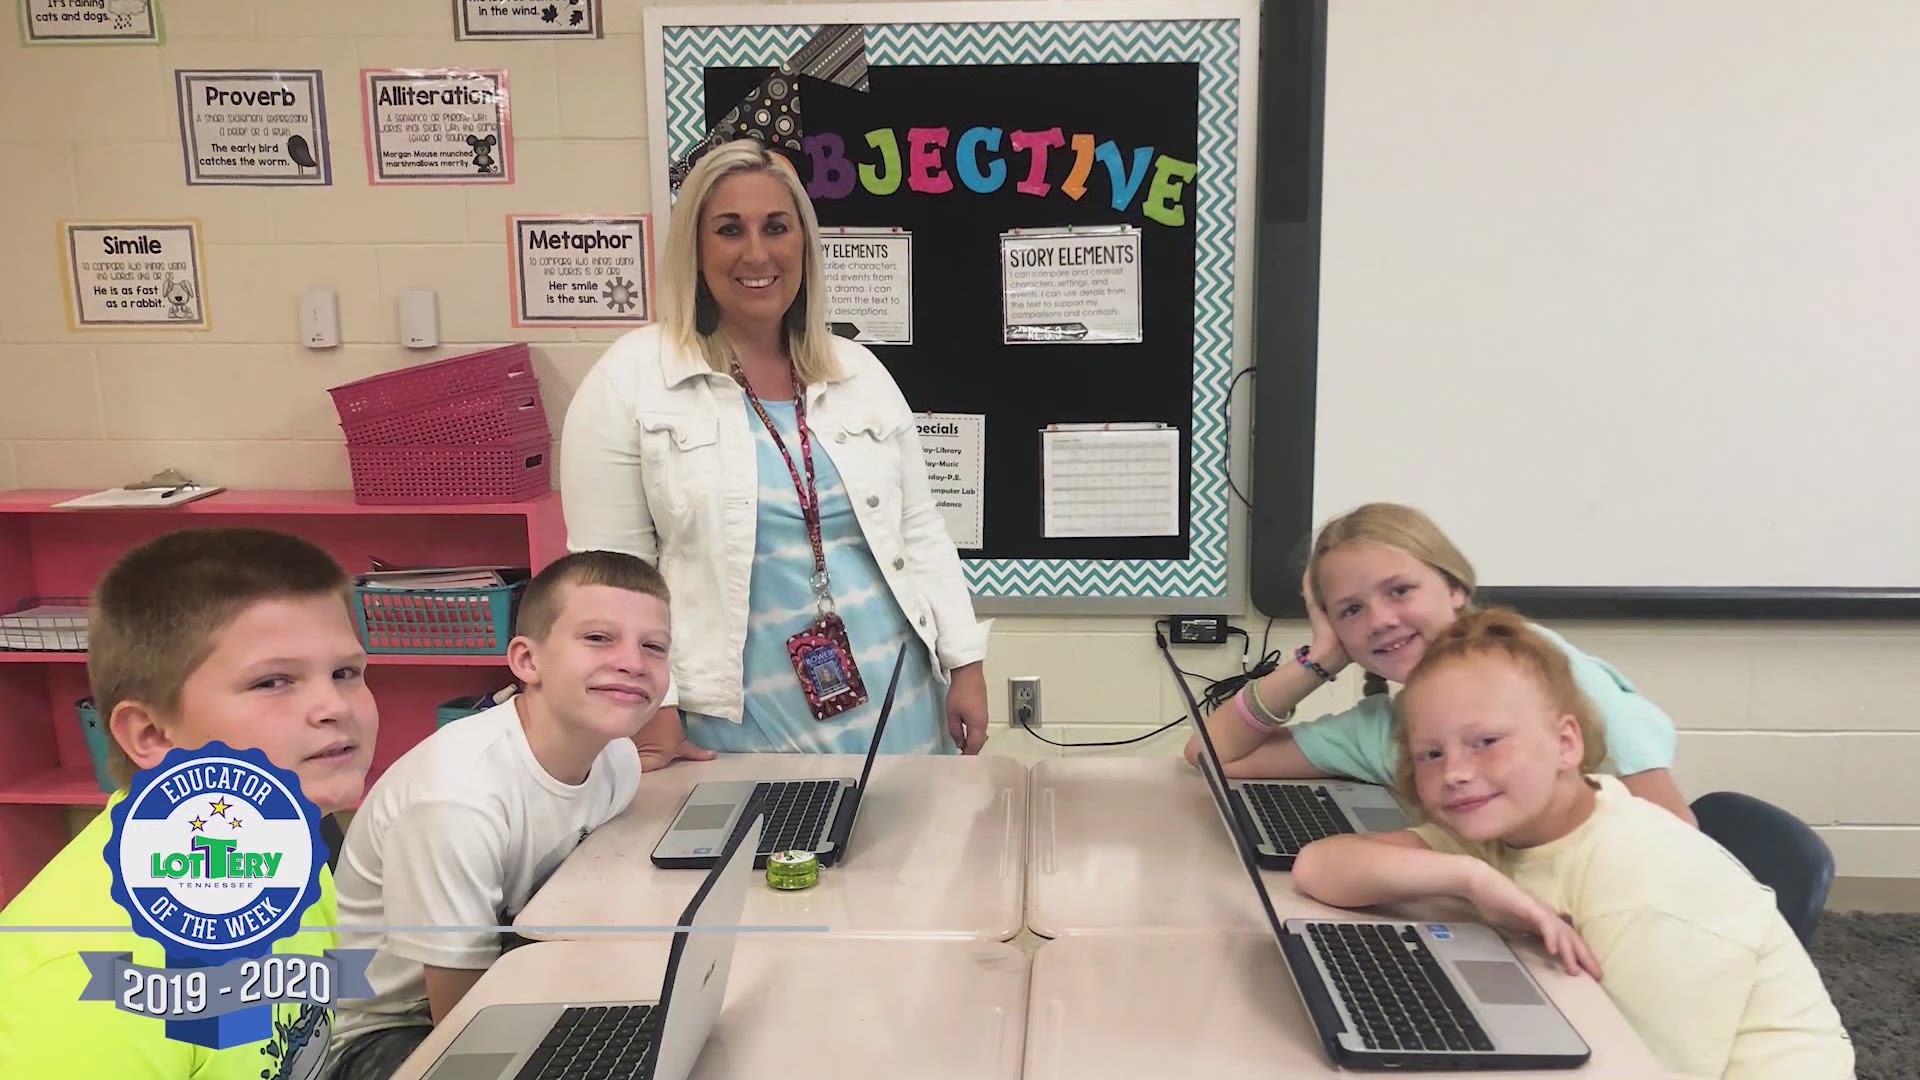 The Educator of the Week 9/30 is Christina Knobloch